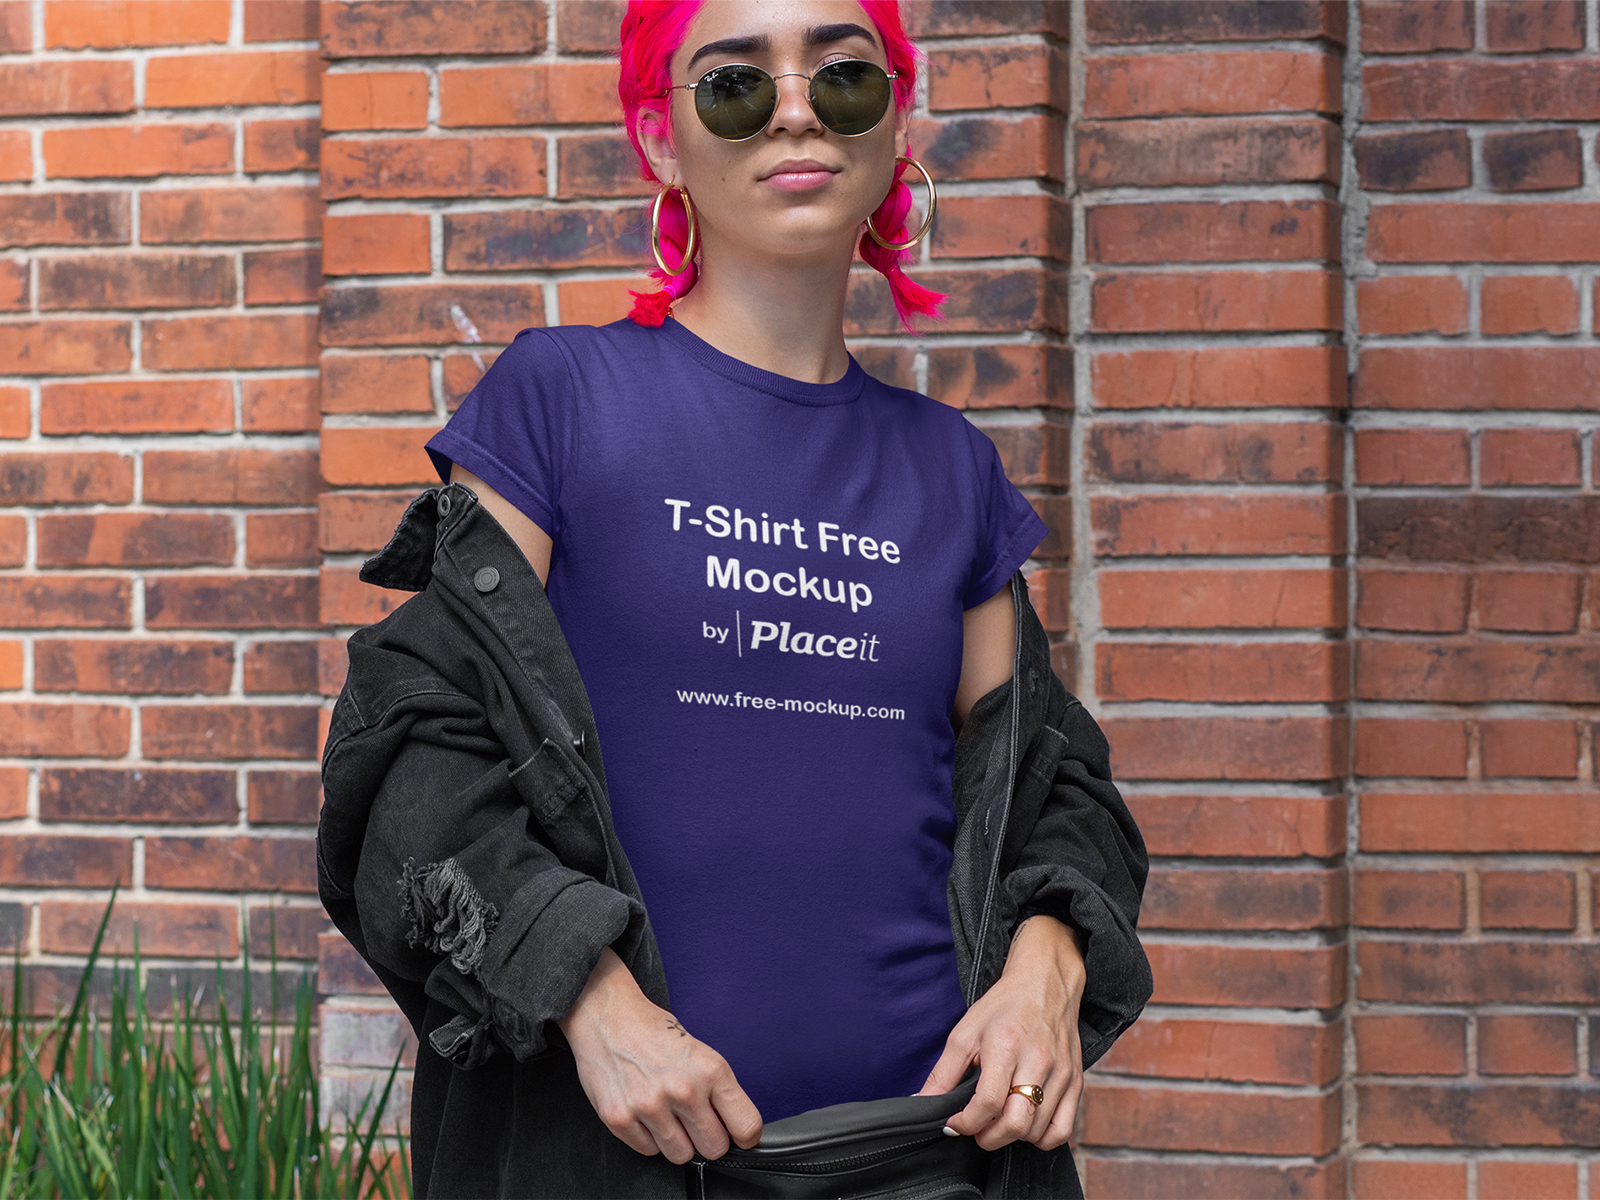 T-Shirt Online Free Mockup of a Woman with Pink Hair